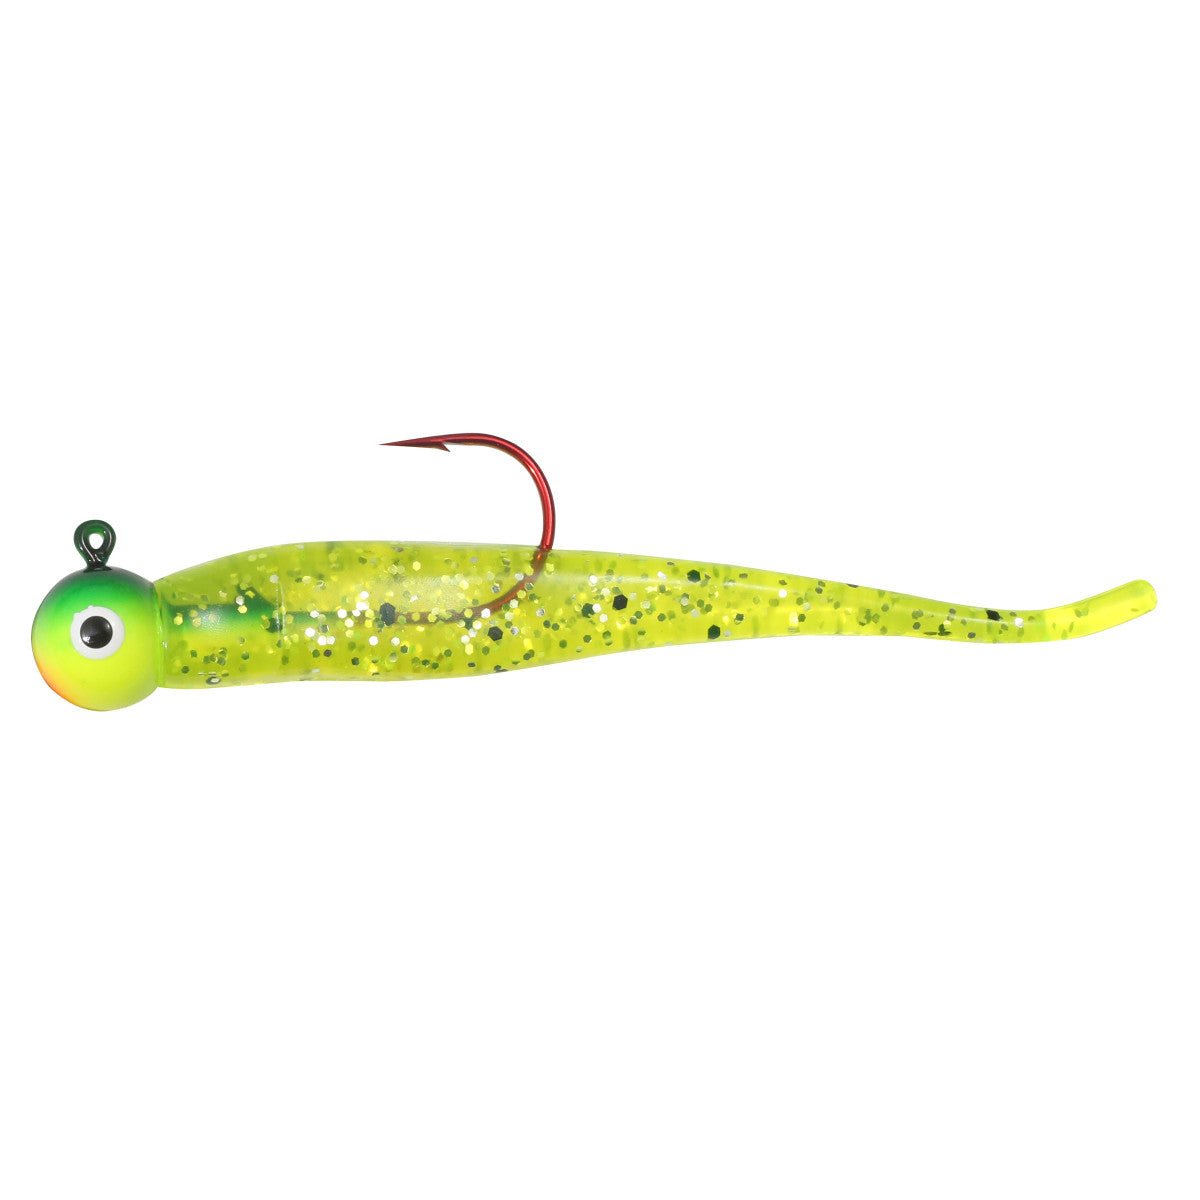 Northland Rigged Gum-Ball Jig Minnow - Hamilton Bait and Tackle